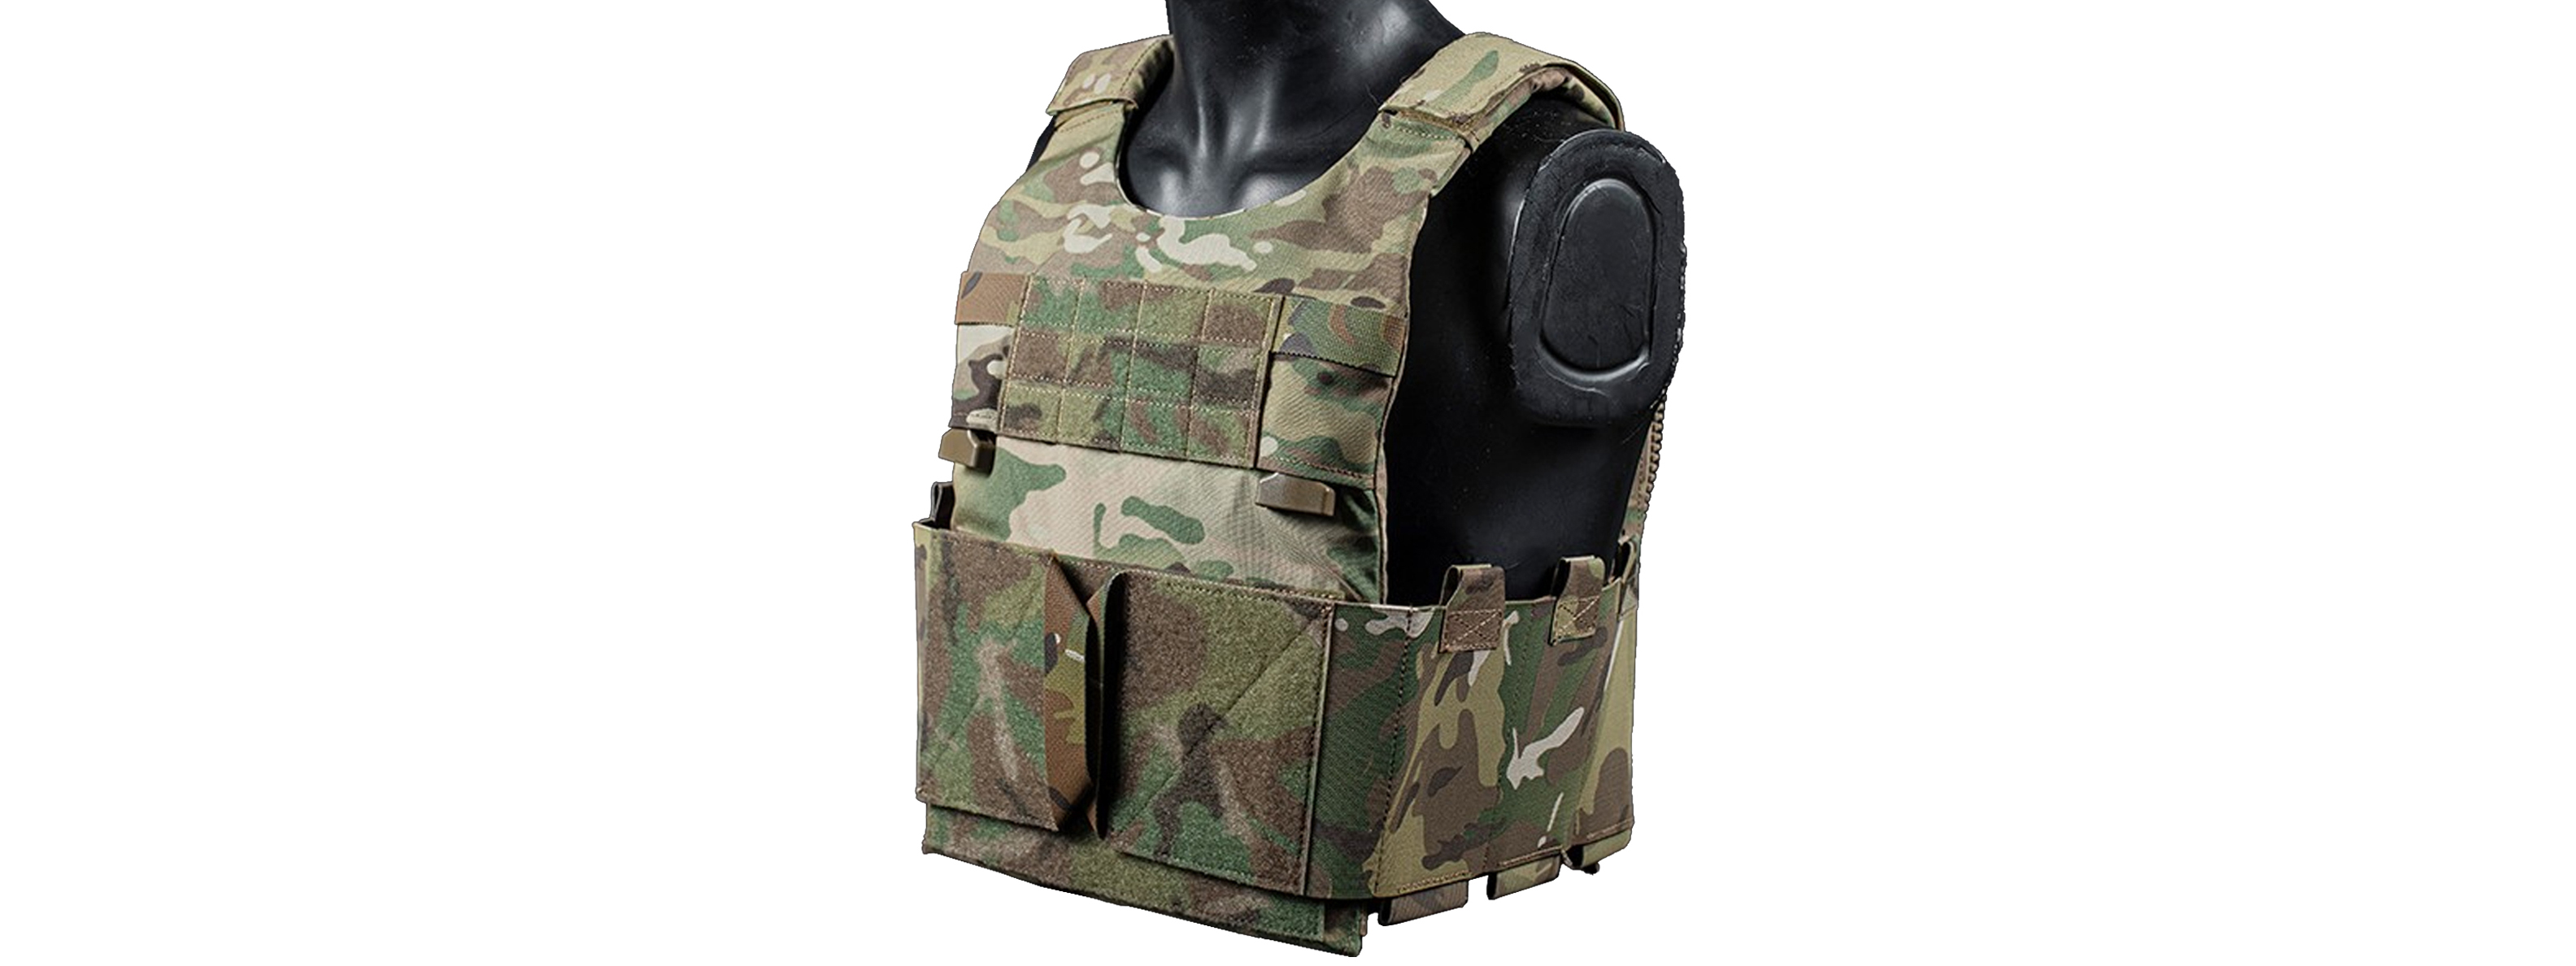 Airsoft Tactical Vest Carrier - (Camo)